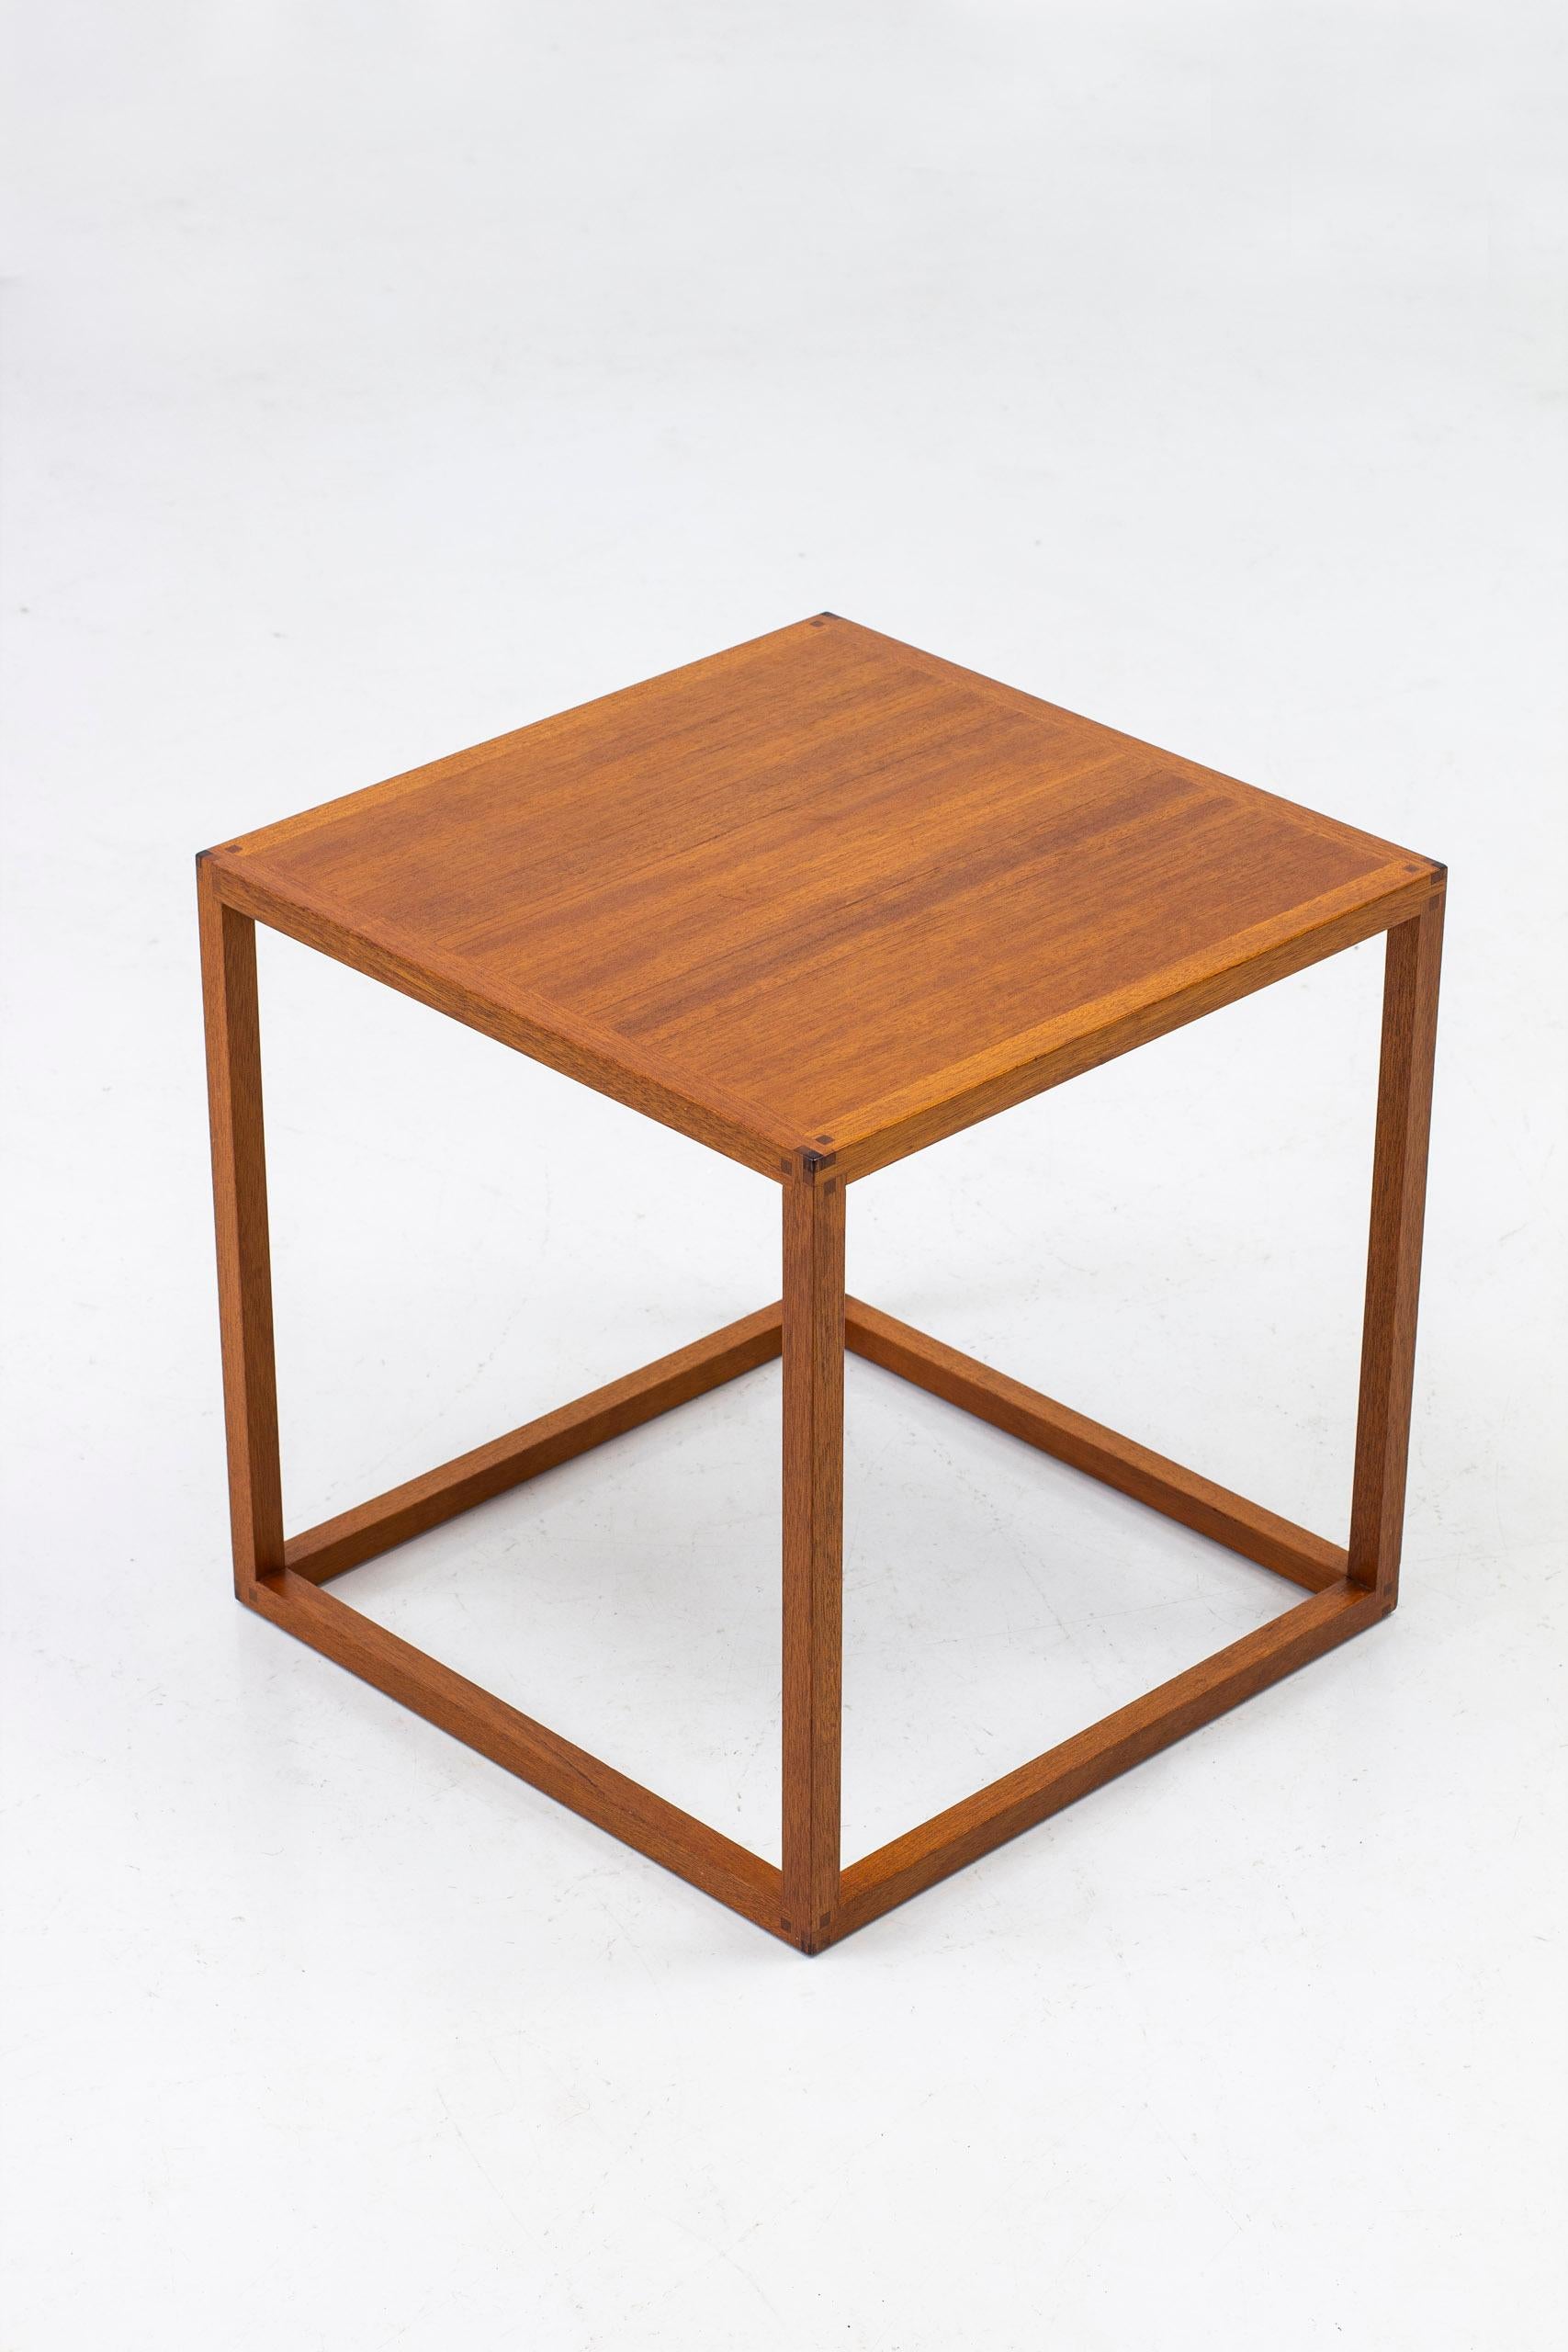 Unique side table made by master cabinetmaker Lars Larsson. Most likely designed by Stig Lönngren for the HI-gruppen. Hand made in 1973 in Sweden. Incredible quality with beautiful joinery. Very good vintage condition with few signs of wear and